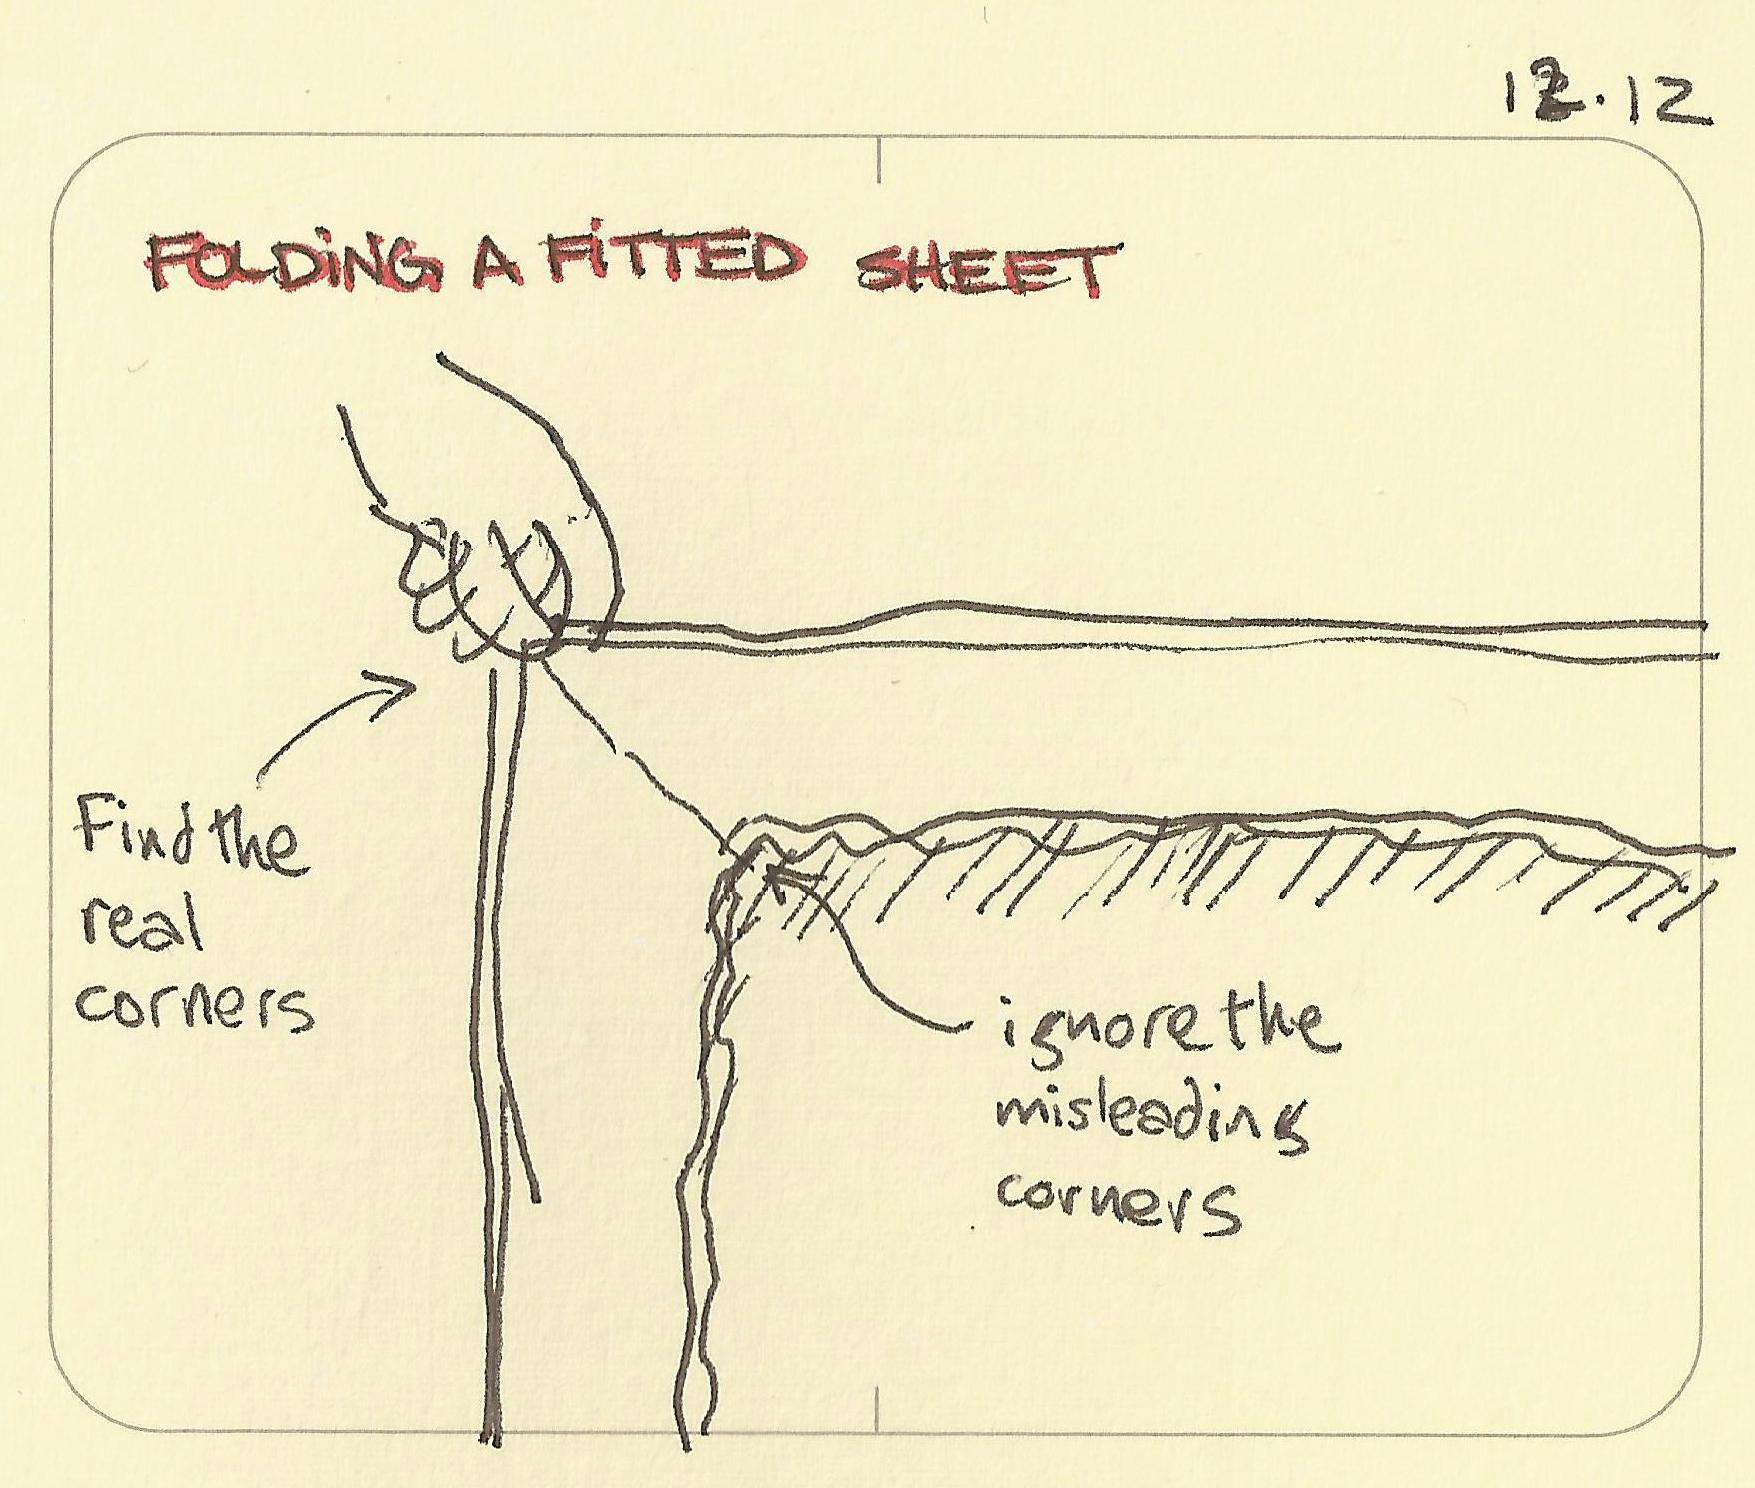 Folding a fitted sheet - Sketchplanations